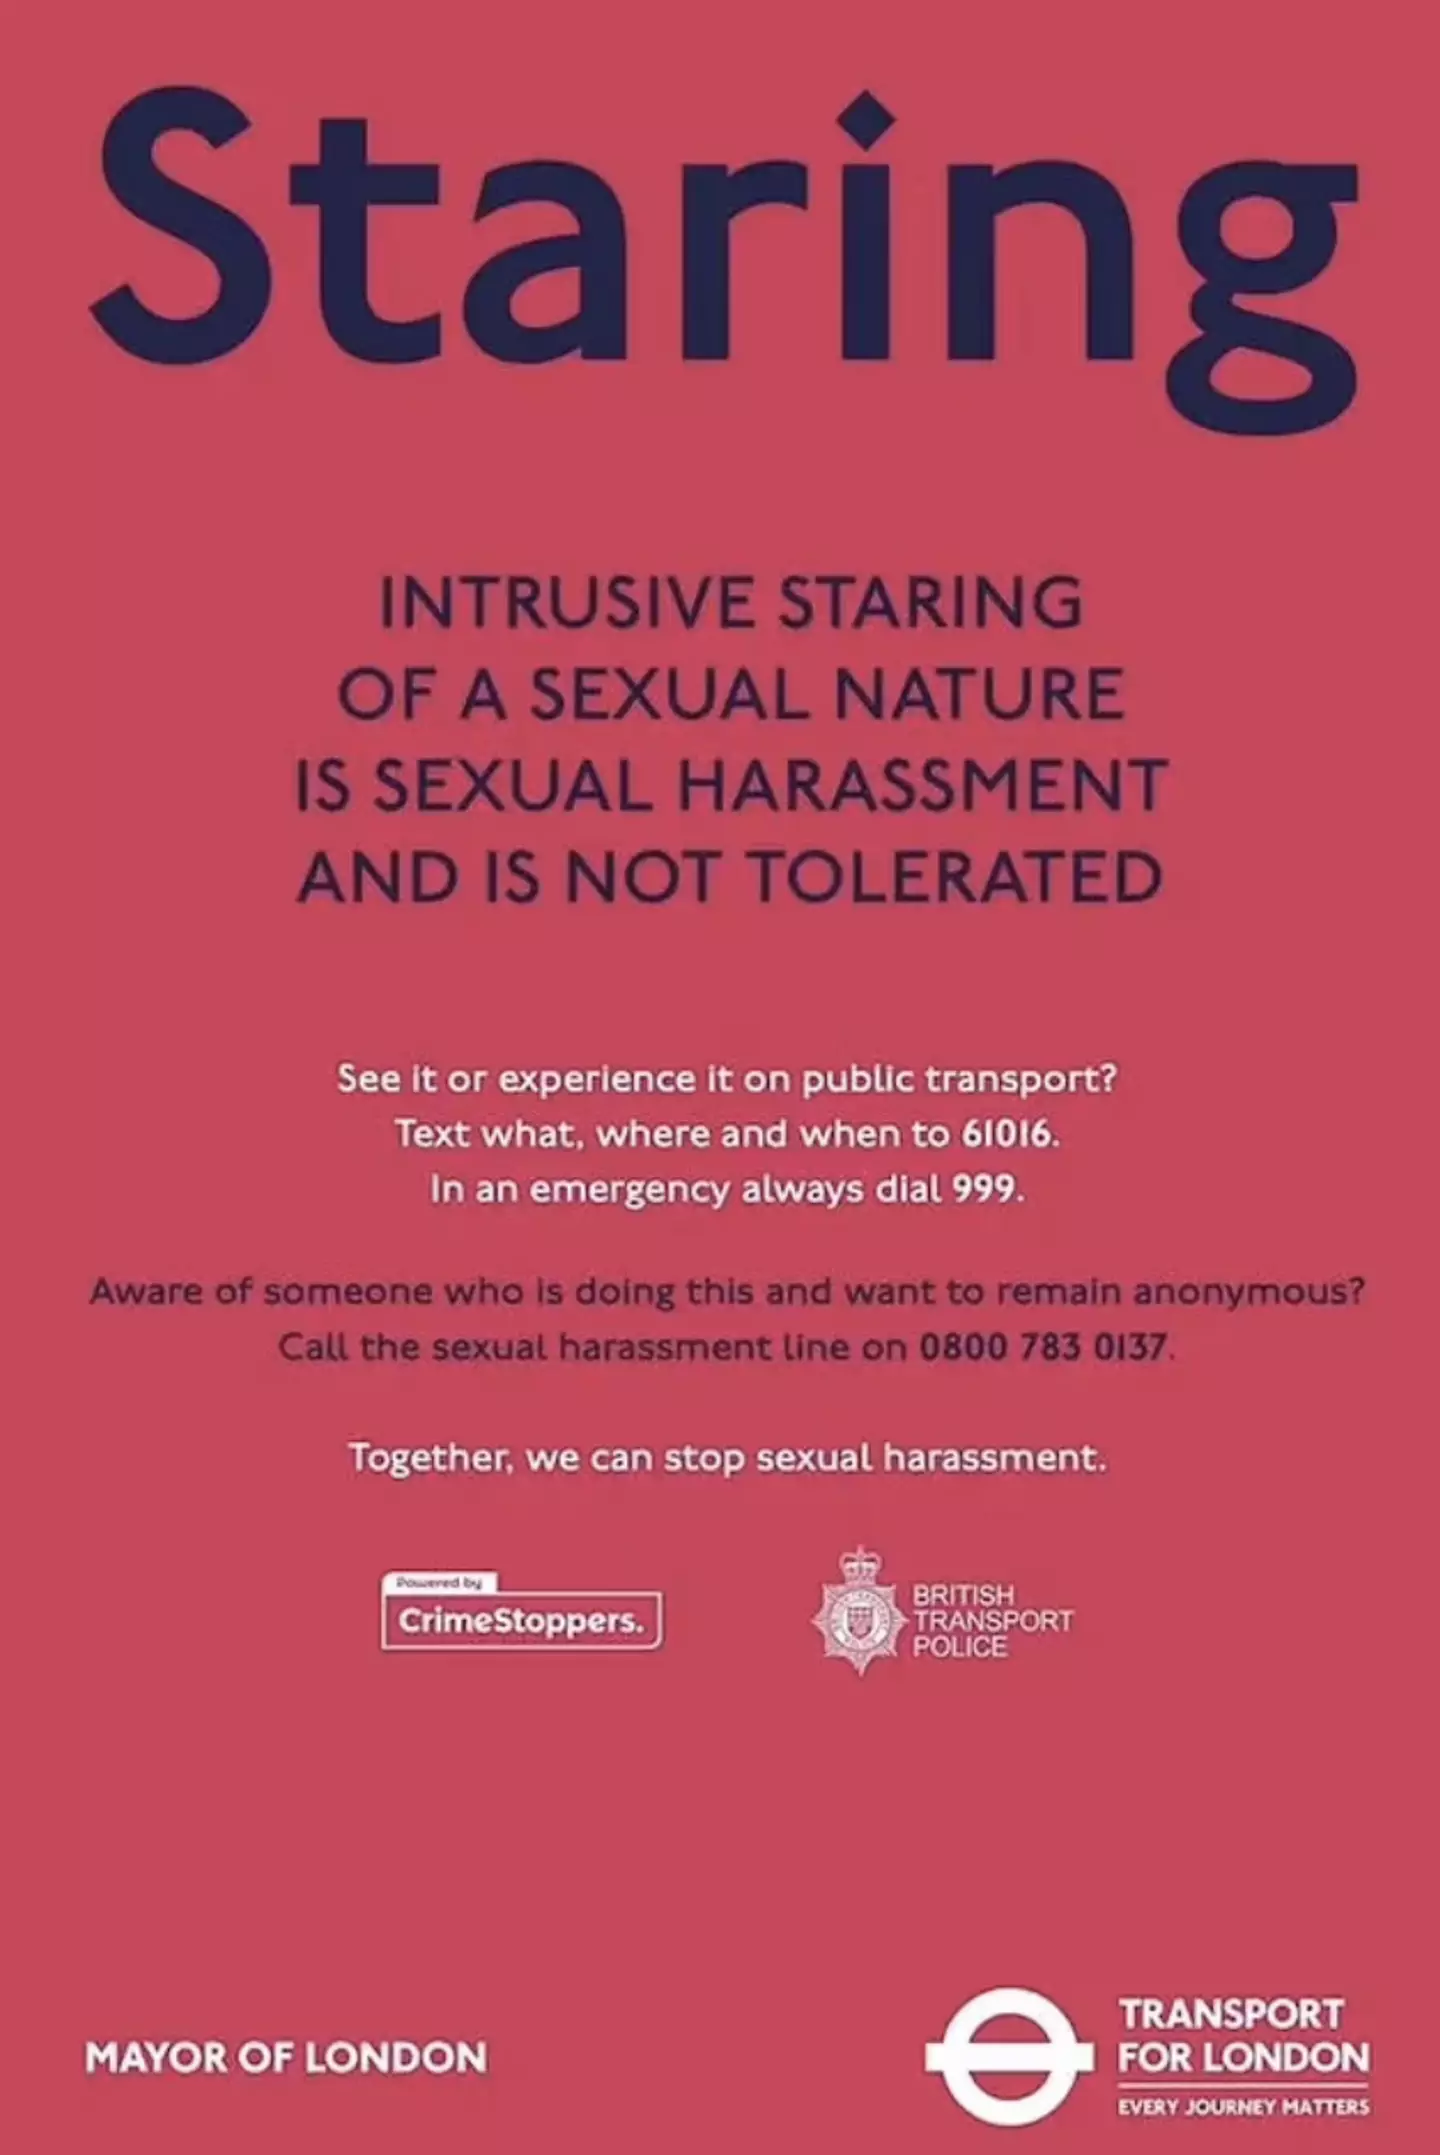 TfL have launched a campaign to combat predatory behaviour on the tube.